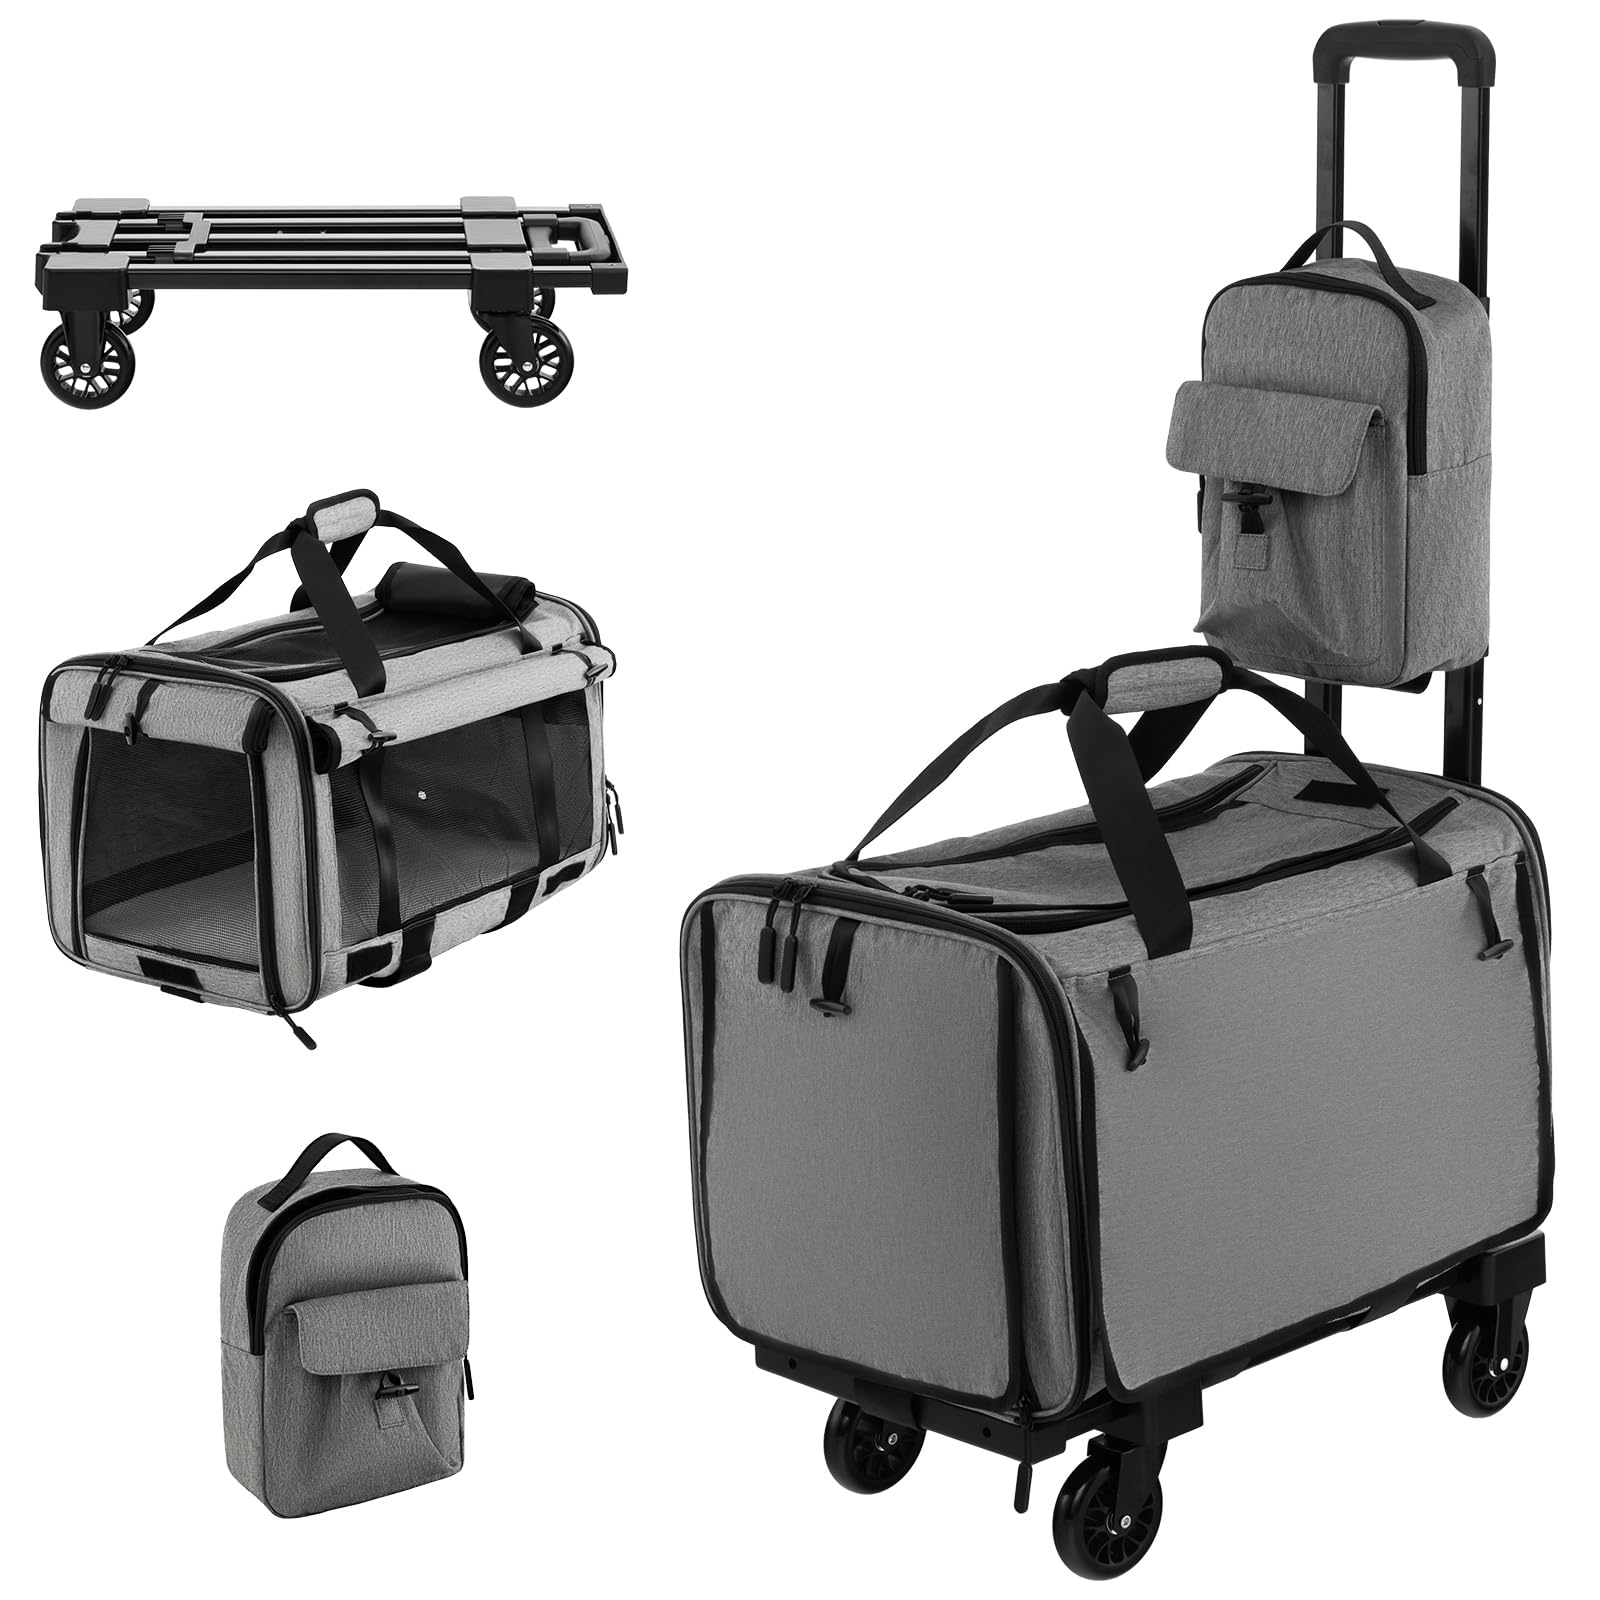 Giantex Cat Carrier with Wheels